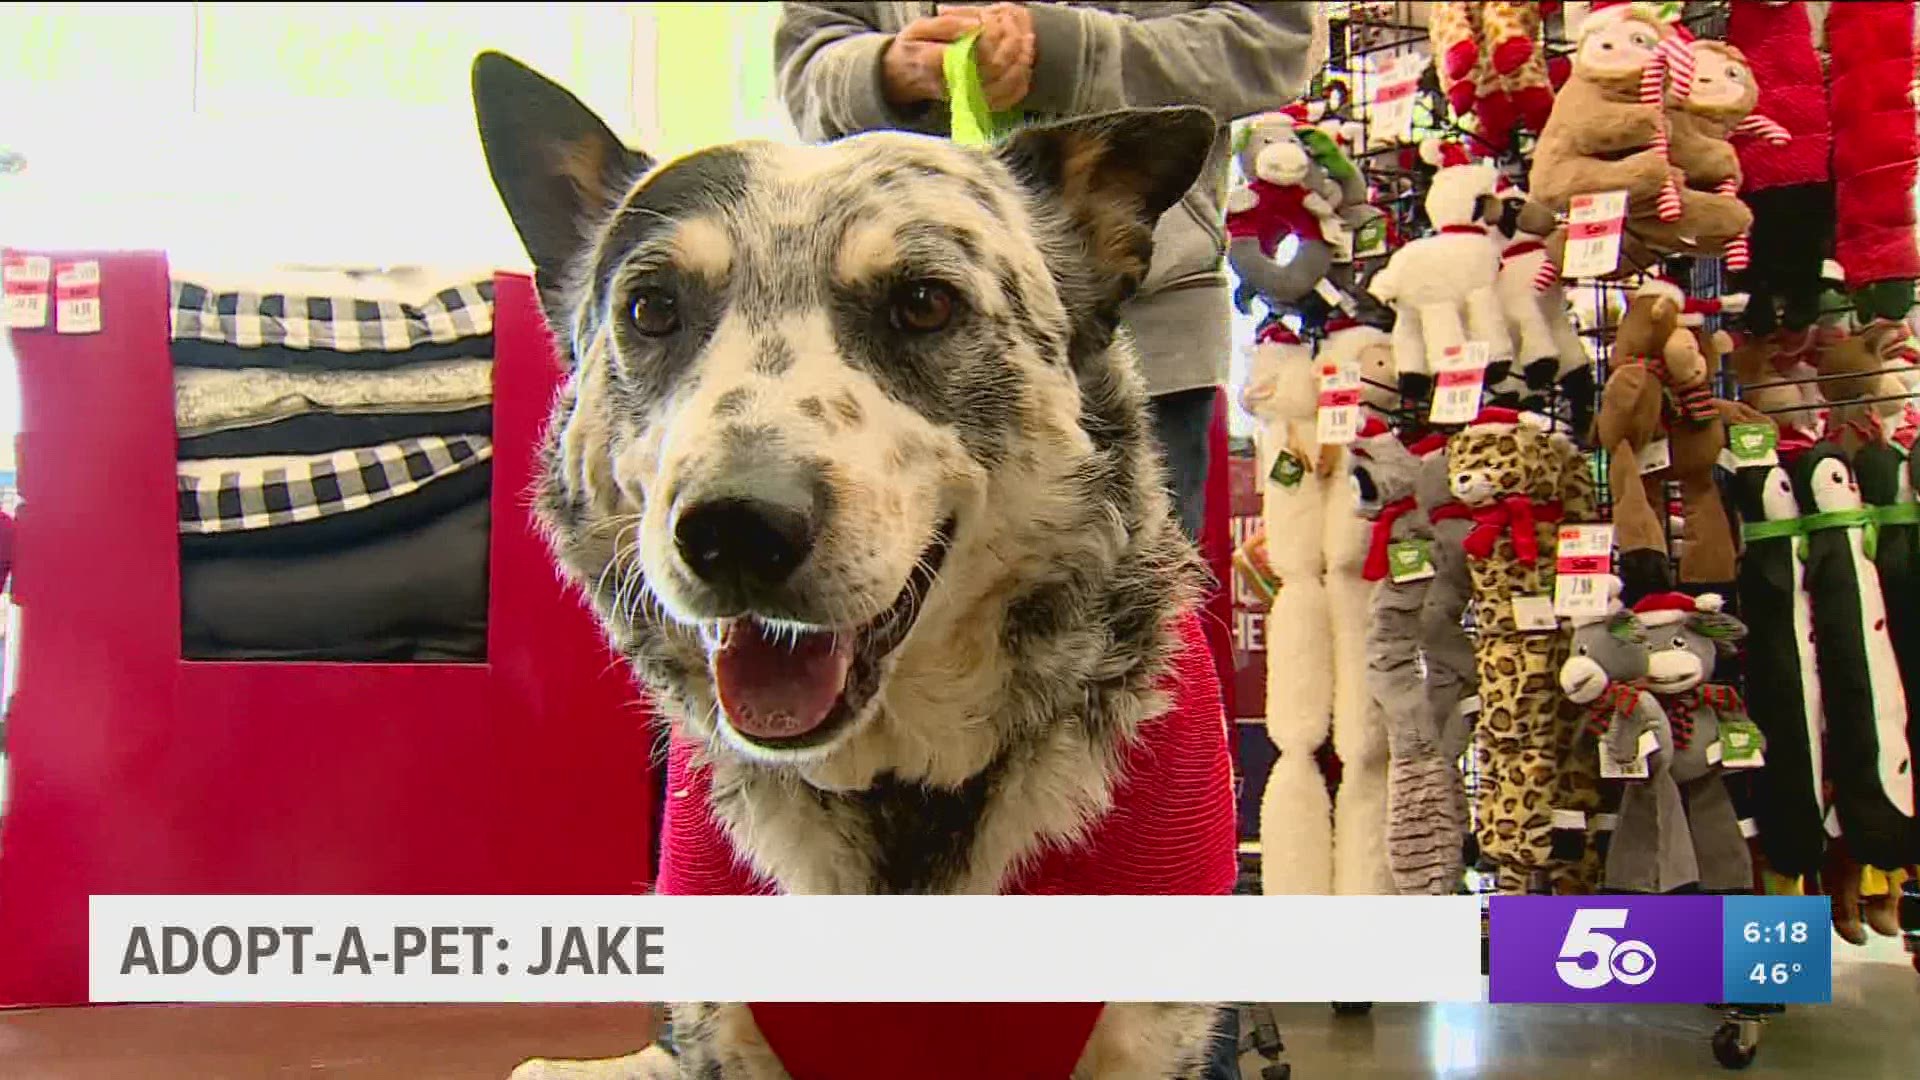 Jake was returned to the rescue after his new owners went back to work and school, and didn't have time for him anymore. https://bit.ly/38MIQRJ